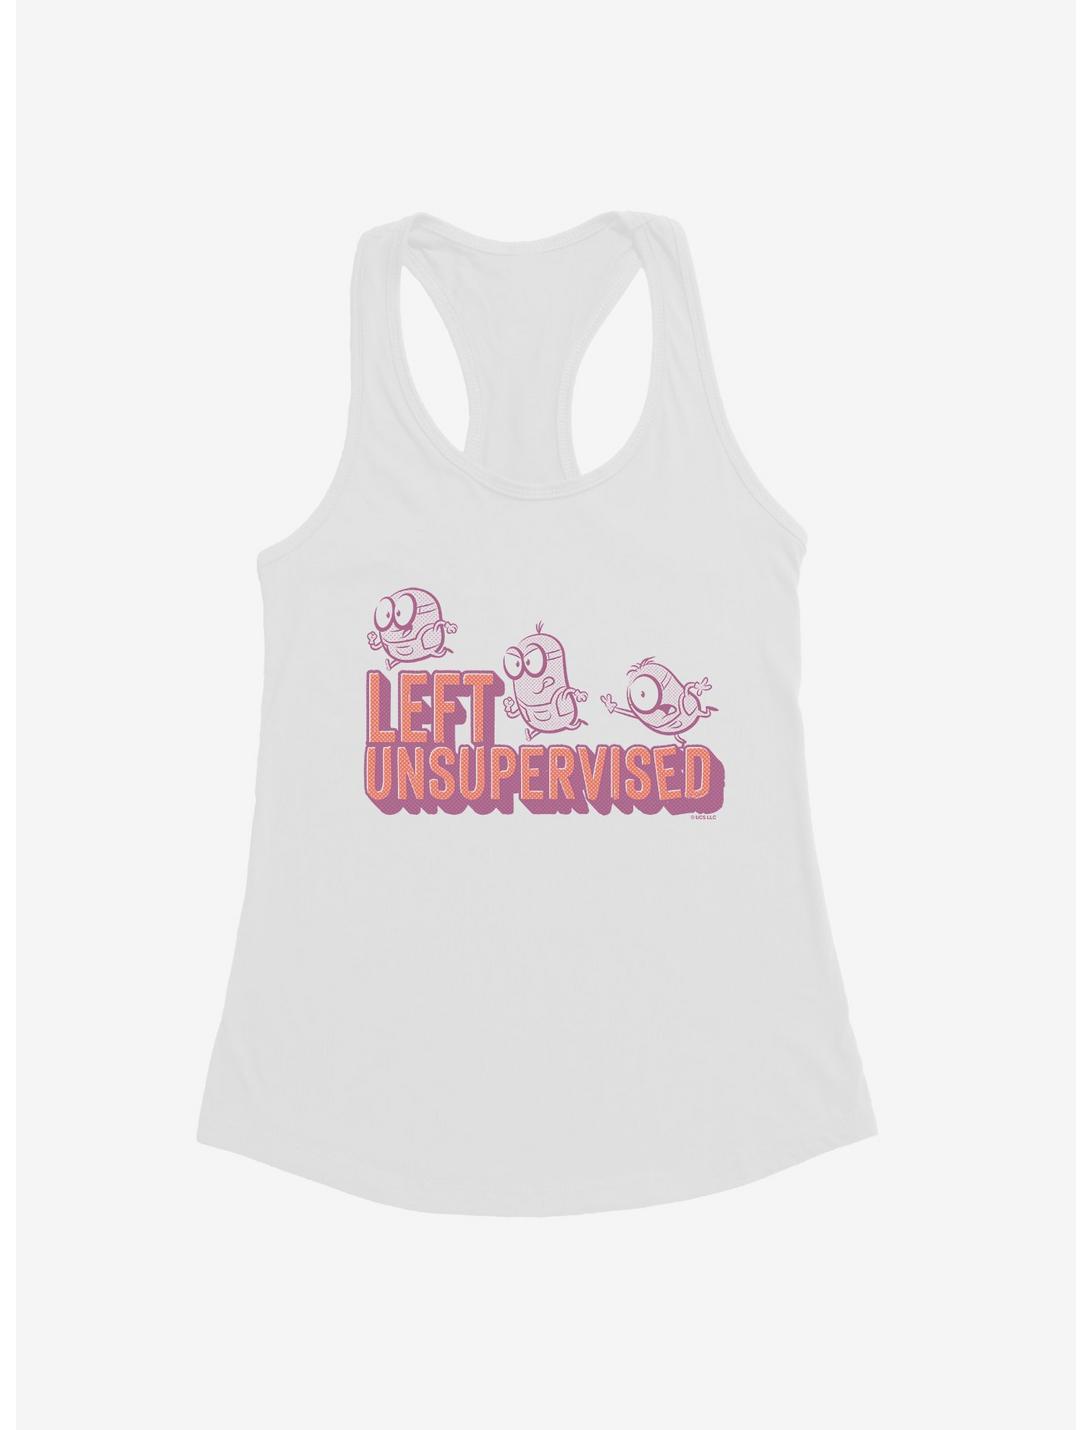 Minions Spotty Left Unsupervised Womens Tank Top, WHITE, hi-res